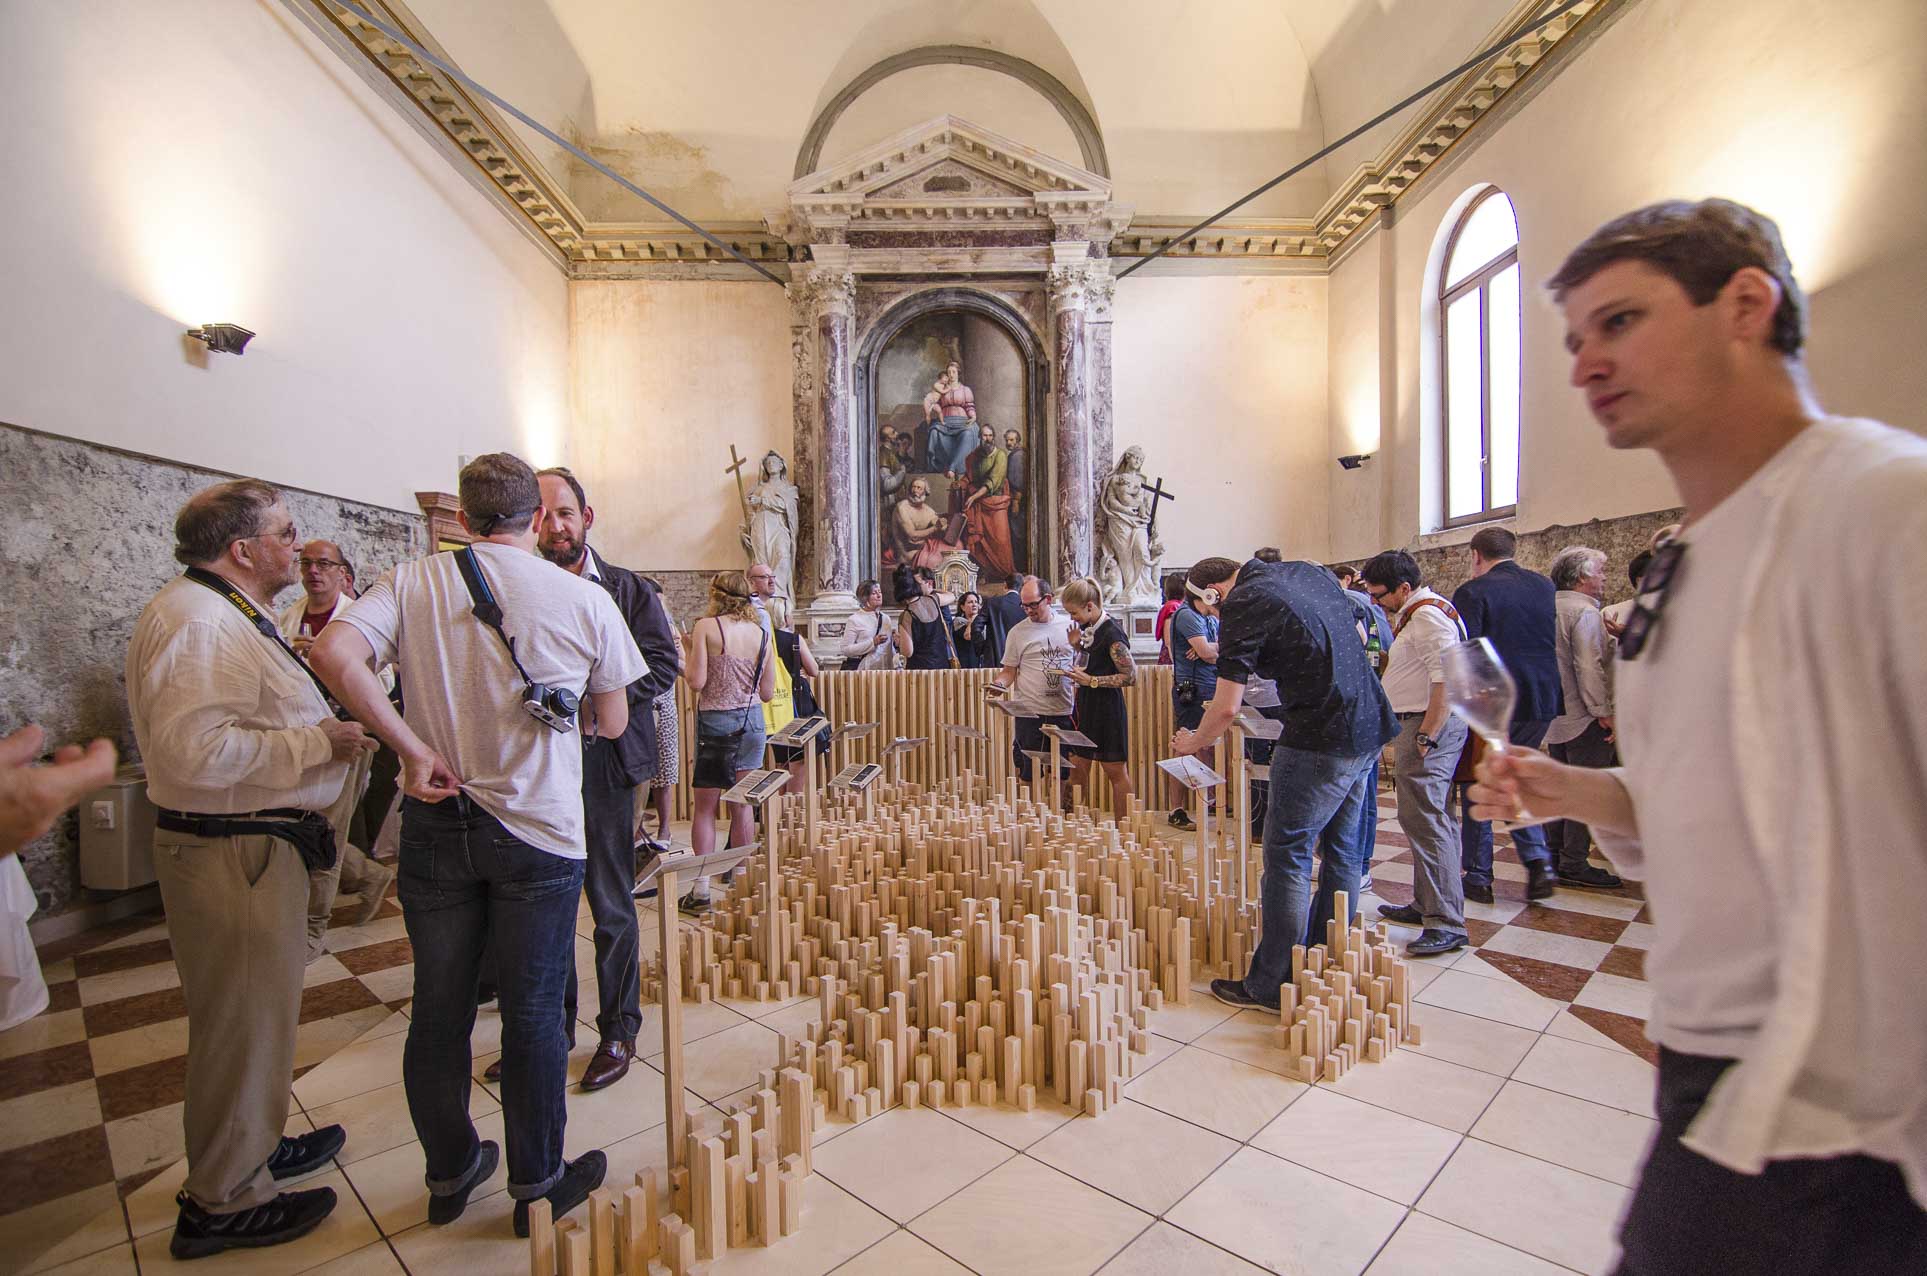 On the floor inside a chapel is a structure in the shape of a dimensional map made from wooden batons of different lengths, each standing upright. Some of the batons hold plaques with mobile phones attached. About 30 people can be seen around the structure.